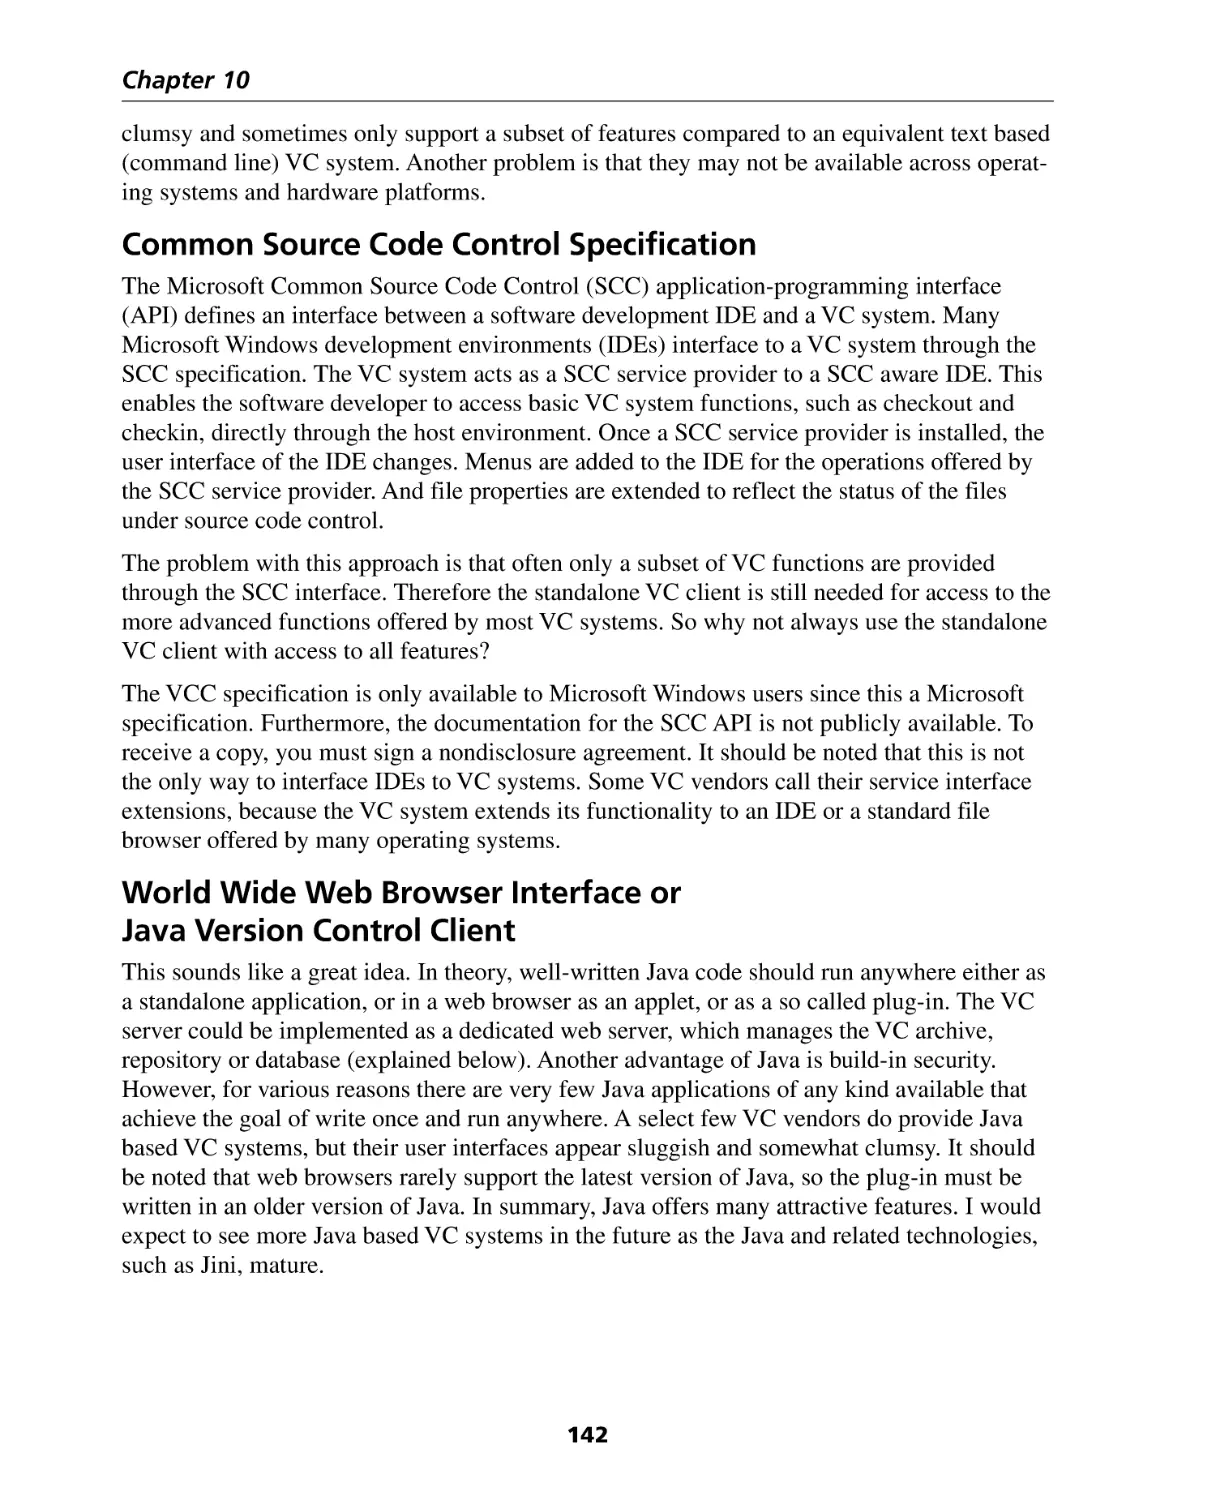 Common Source Code Control Specification
World Wide Web Browser Interface or Java Version Control Client